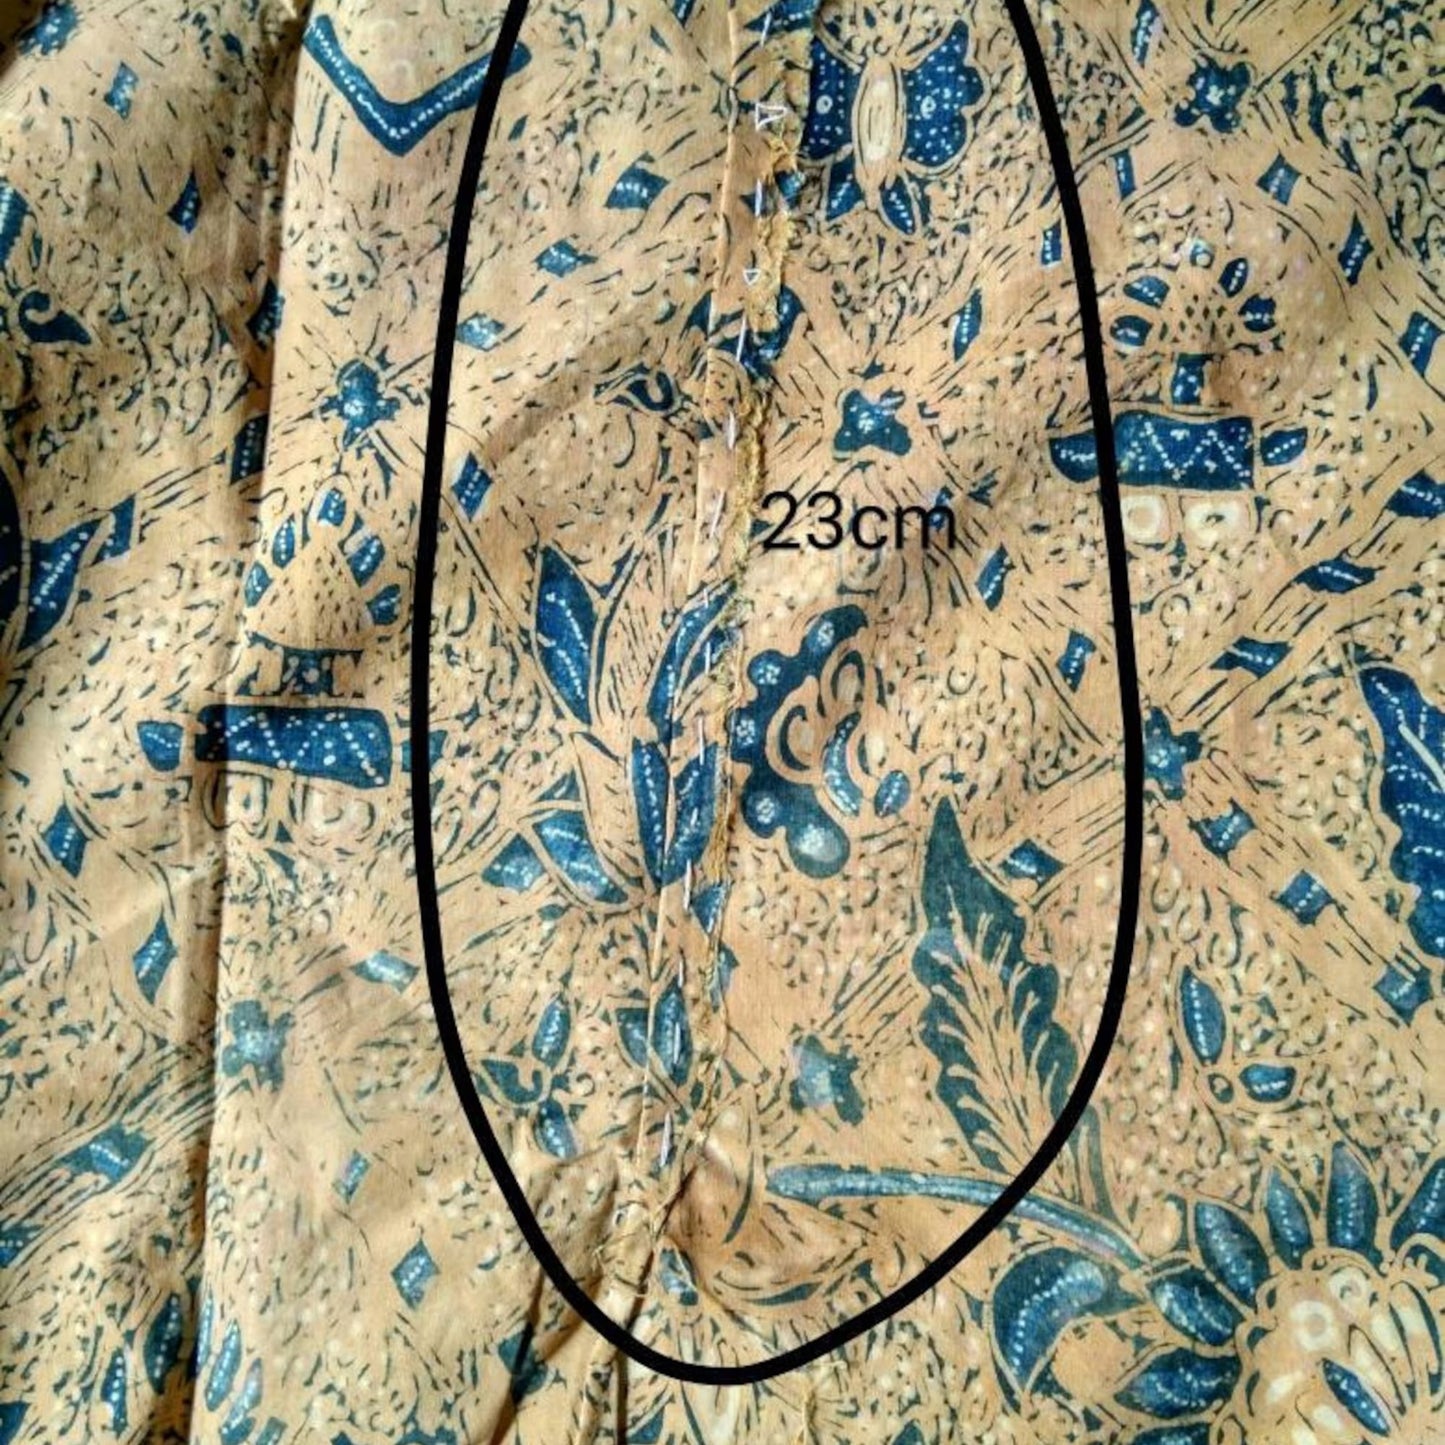 Old Indonesian Hand Drawn Classic Sogan Sidomukti Batik with Peacock and Flower Bouquet